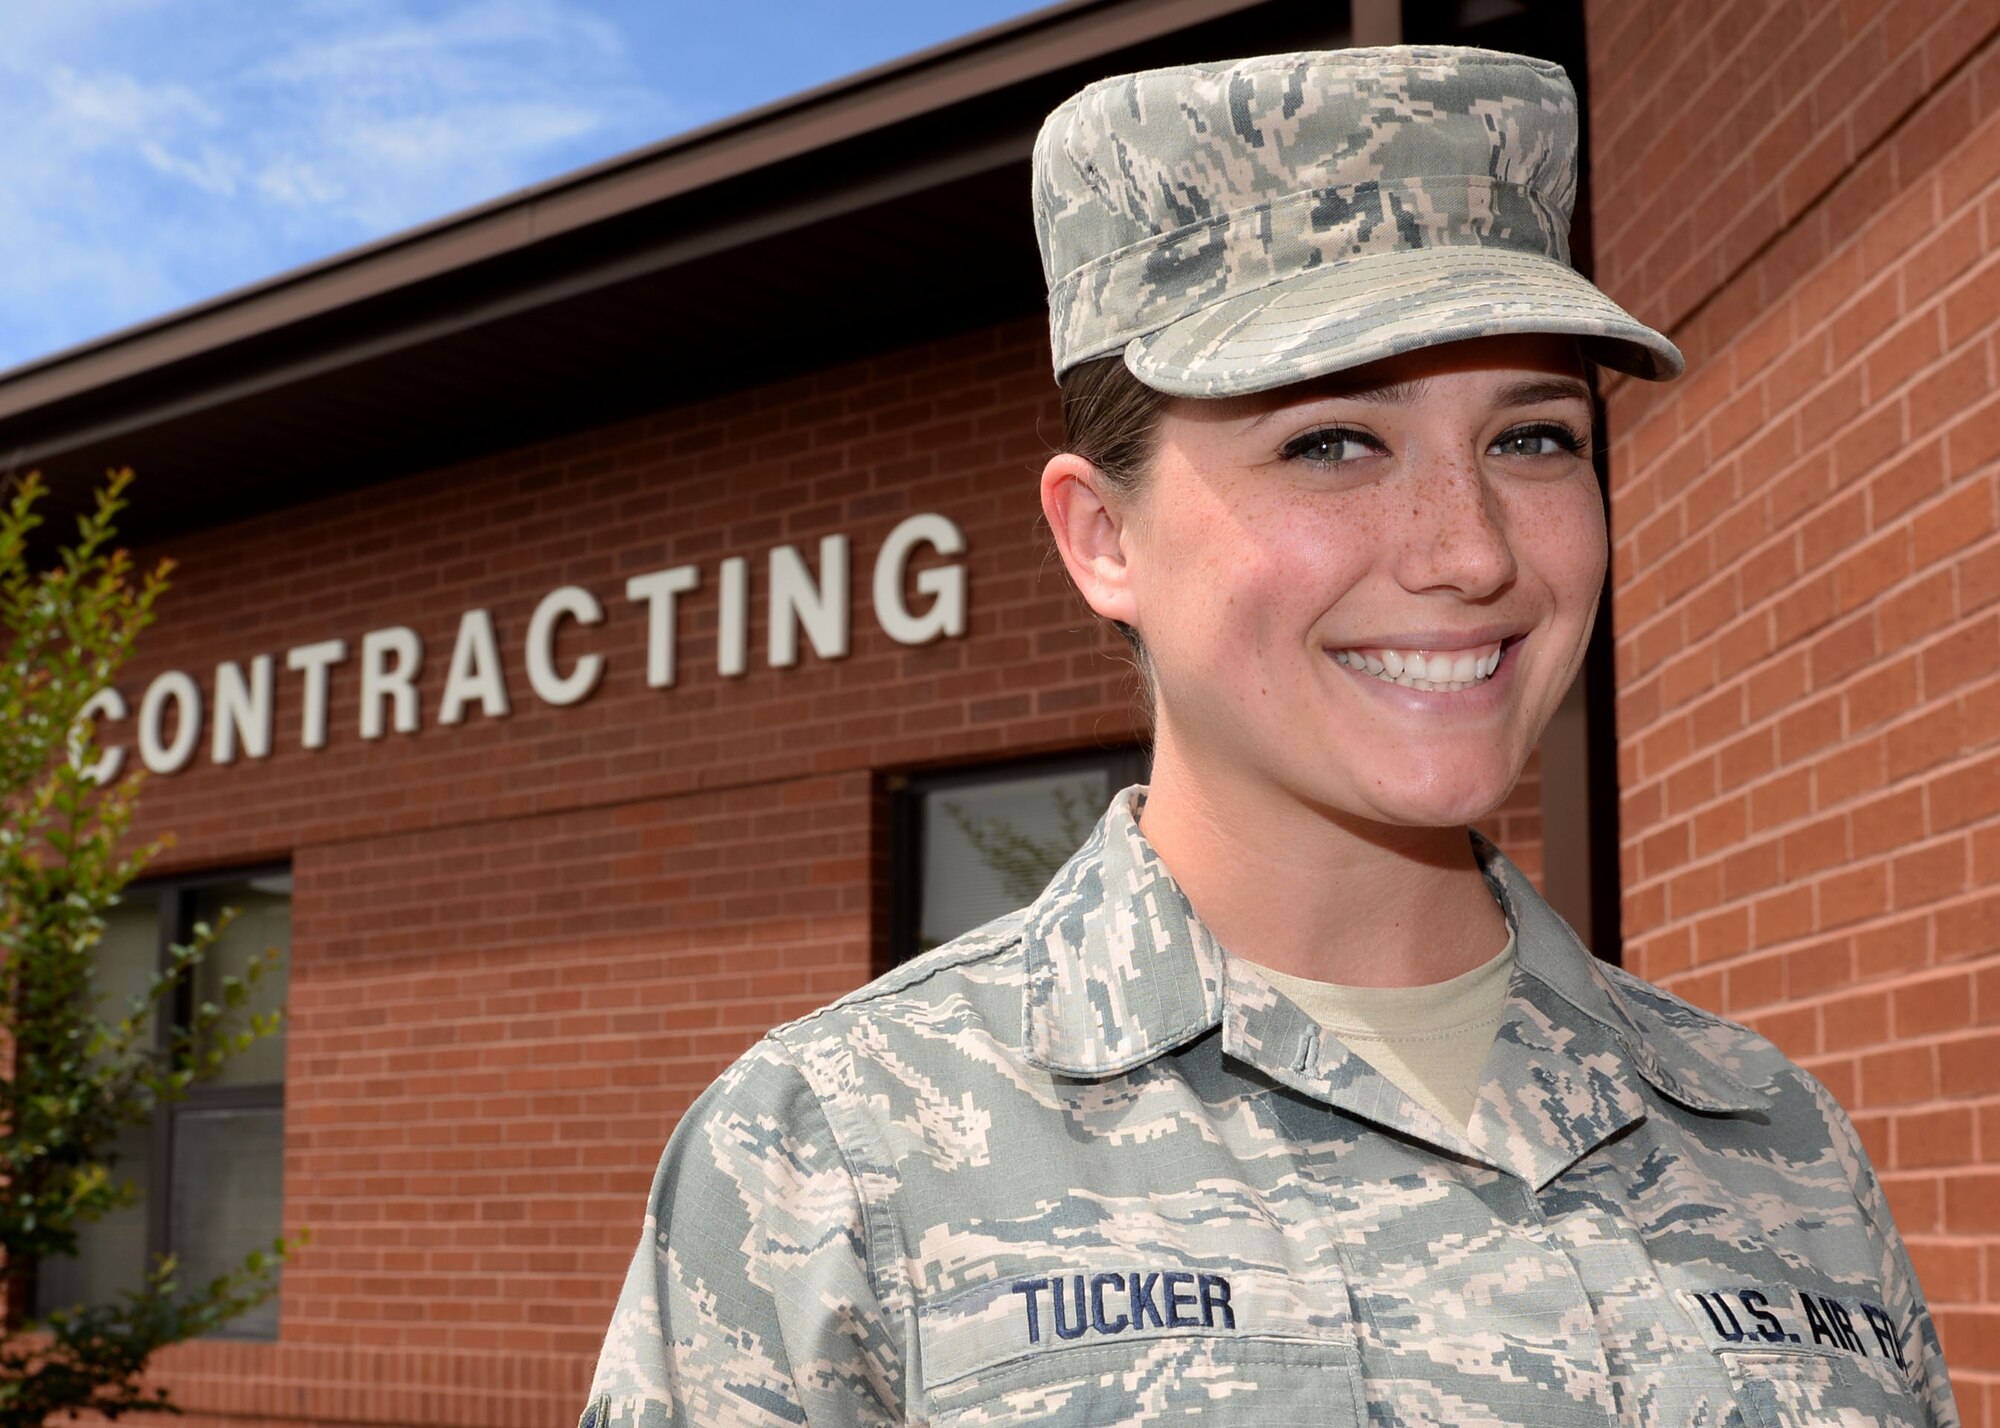 Staff Sgt. Autumn M. Tucker, 19th Contracting Squadron contract specialist, is recognized as the Combat Airlifter of the Week May 17, 2017, at Little Rock Air Force Base, Ark. Tucker was selected for her efforts negotiating and managing 35 services contracts valued at 10 million dollars in support of Team Little Rock.  She is responsible for developing and implementing business strategies for the acquisition of critical base services. (U.S. Air photo by Airman 1st Class Codie Collins)